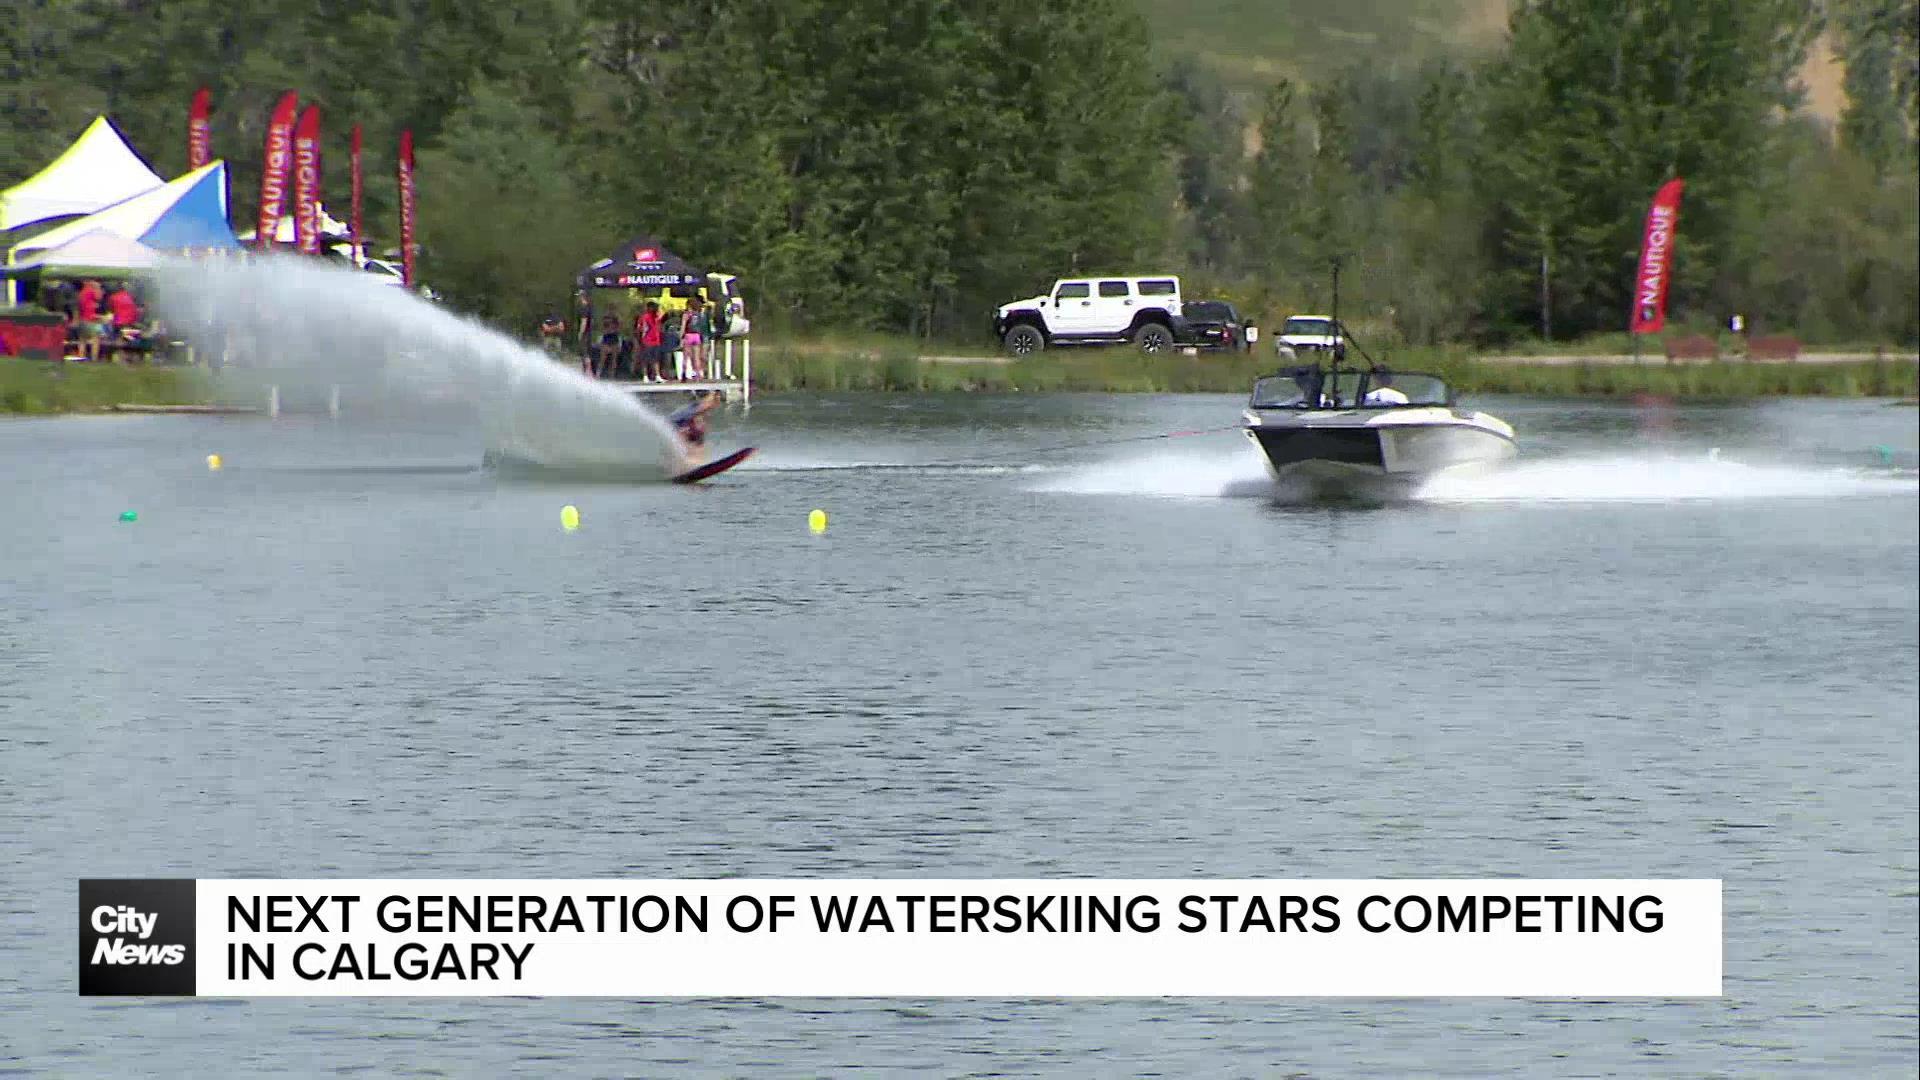 Next generation of waterskiing stars competing in Calgary